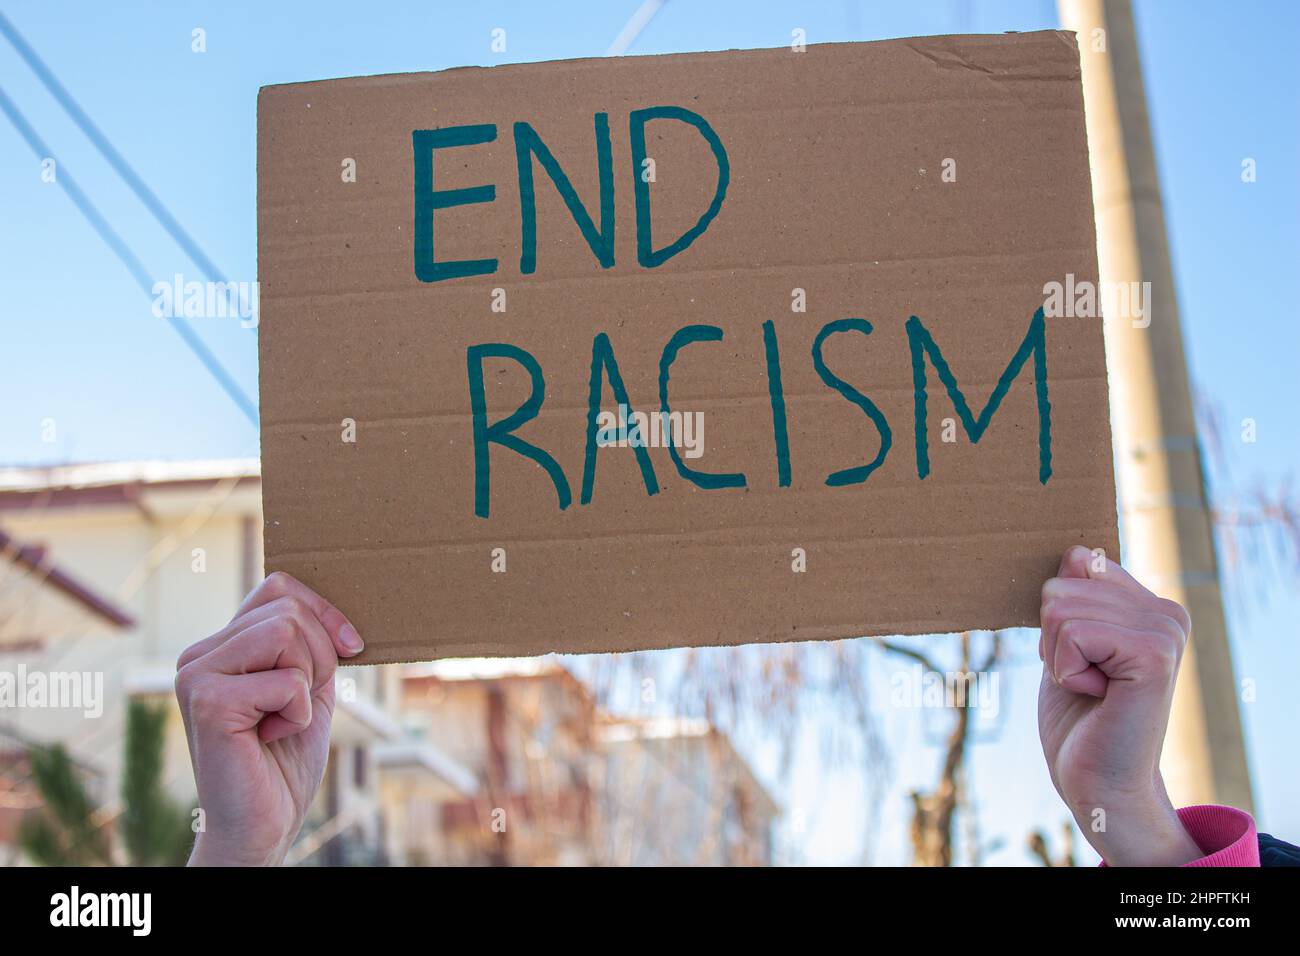 Hand holding cardboard box with end racism text. Woman is protesting racism. Stock Photo